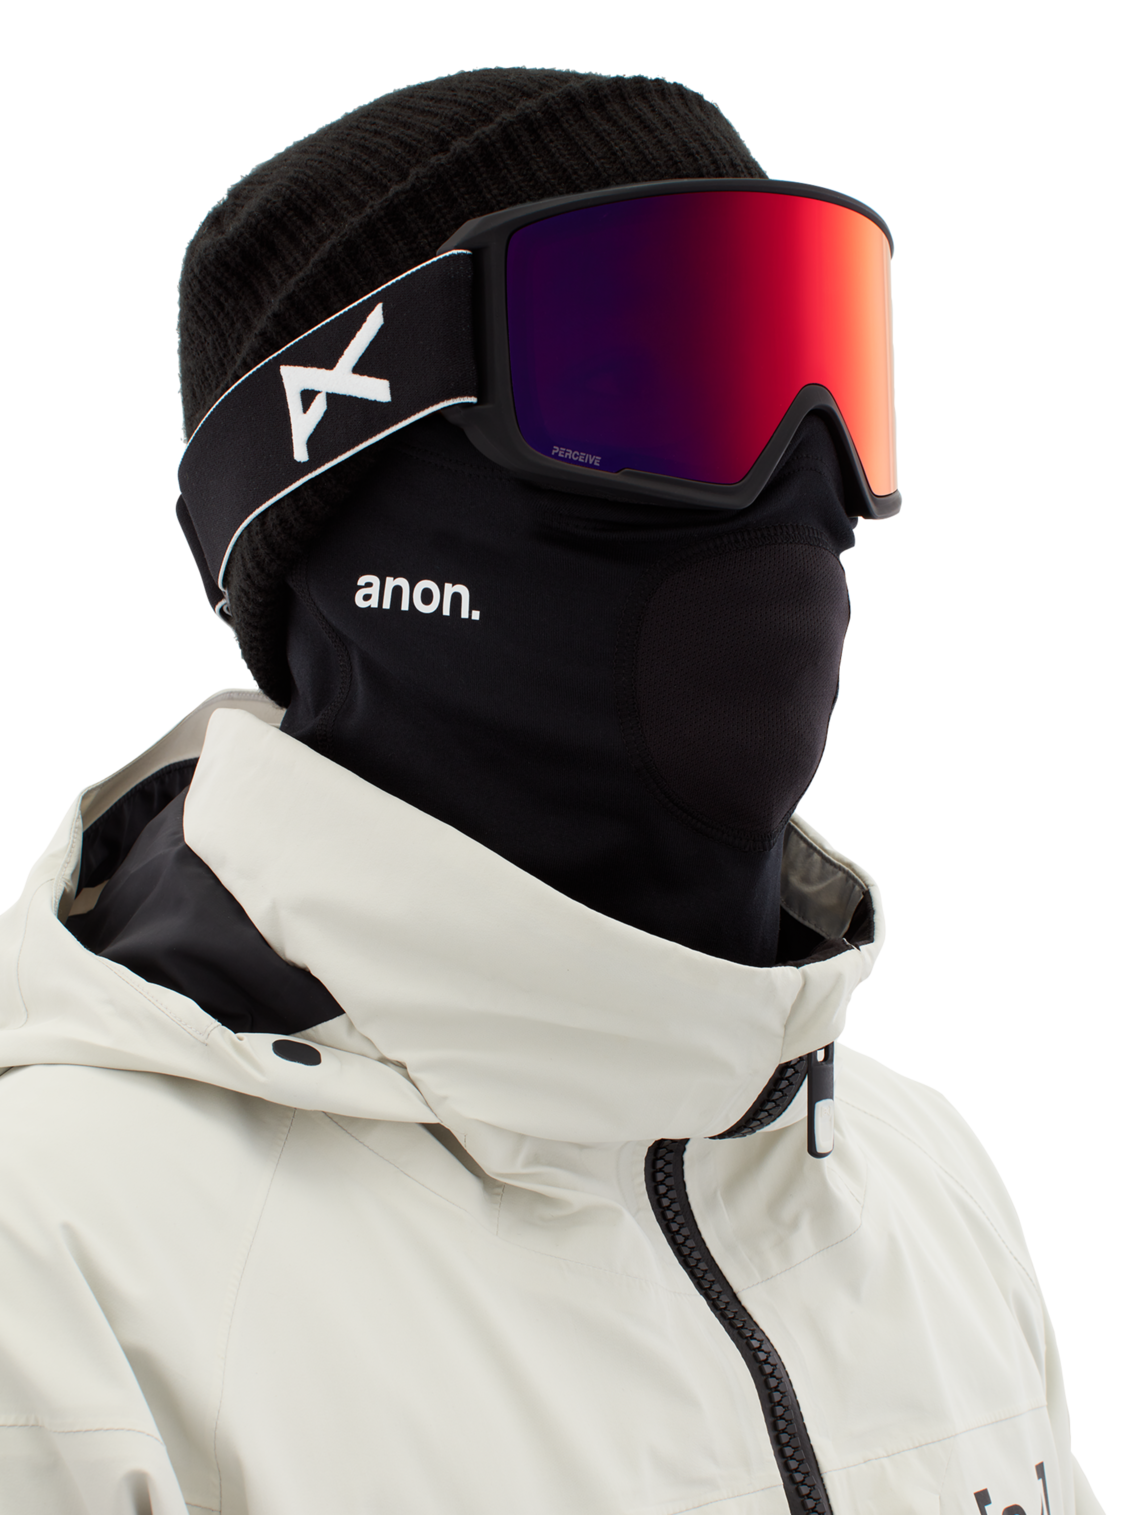 Anon M3 goggle black / perceive sun red (including extra lens and MFI mask)